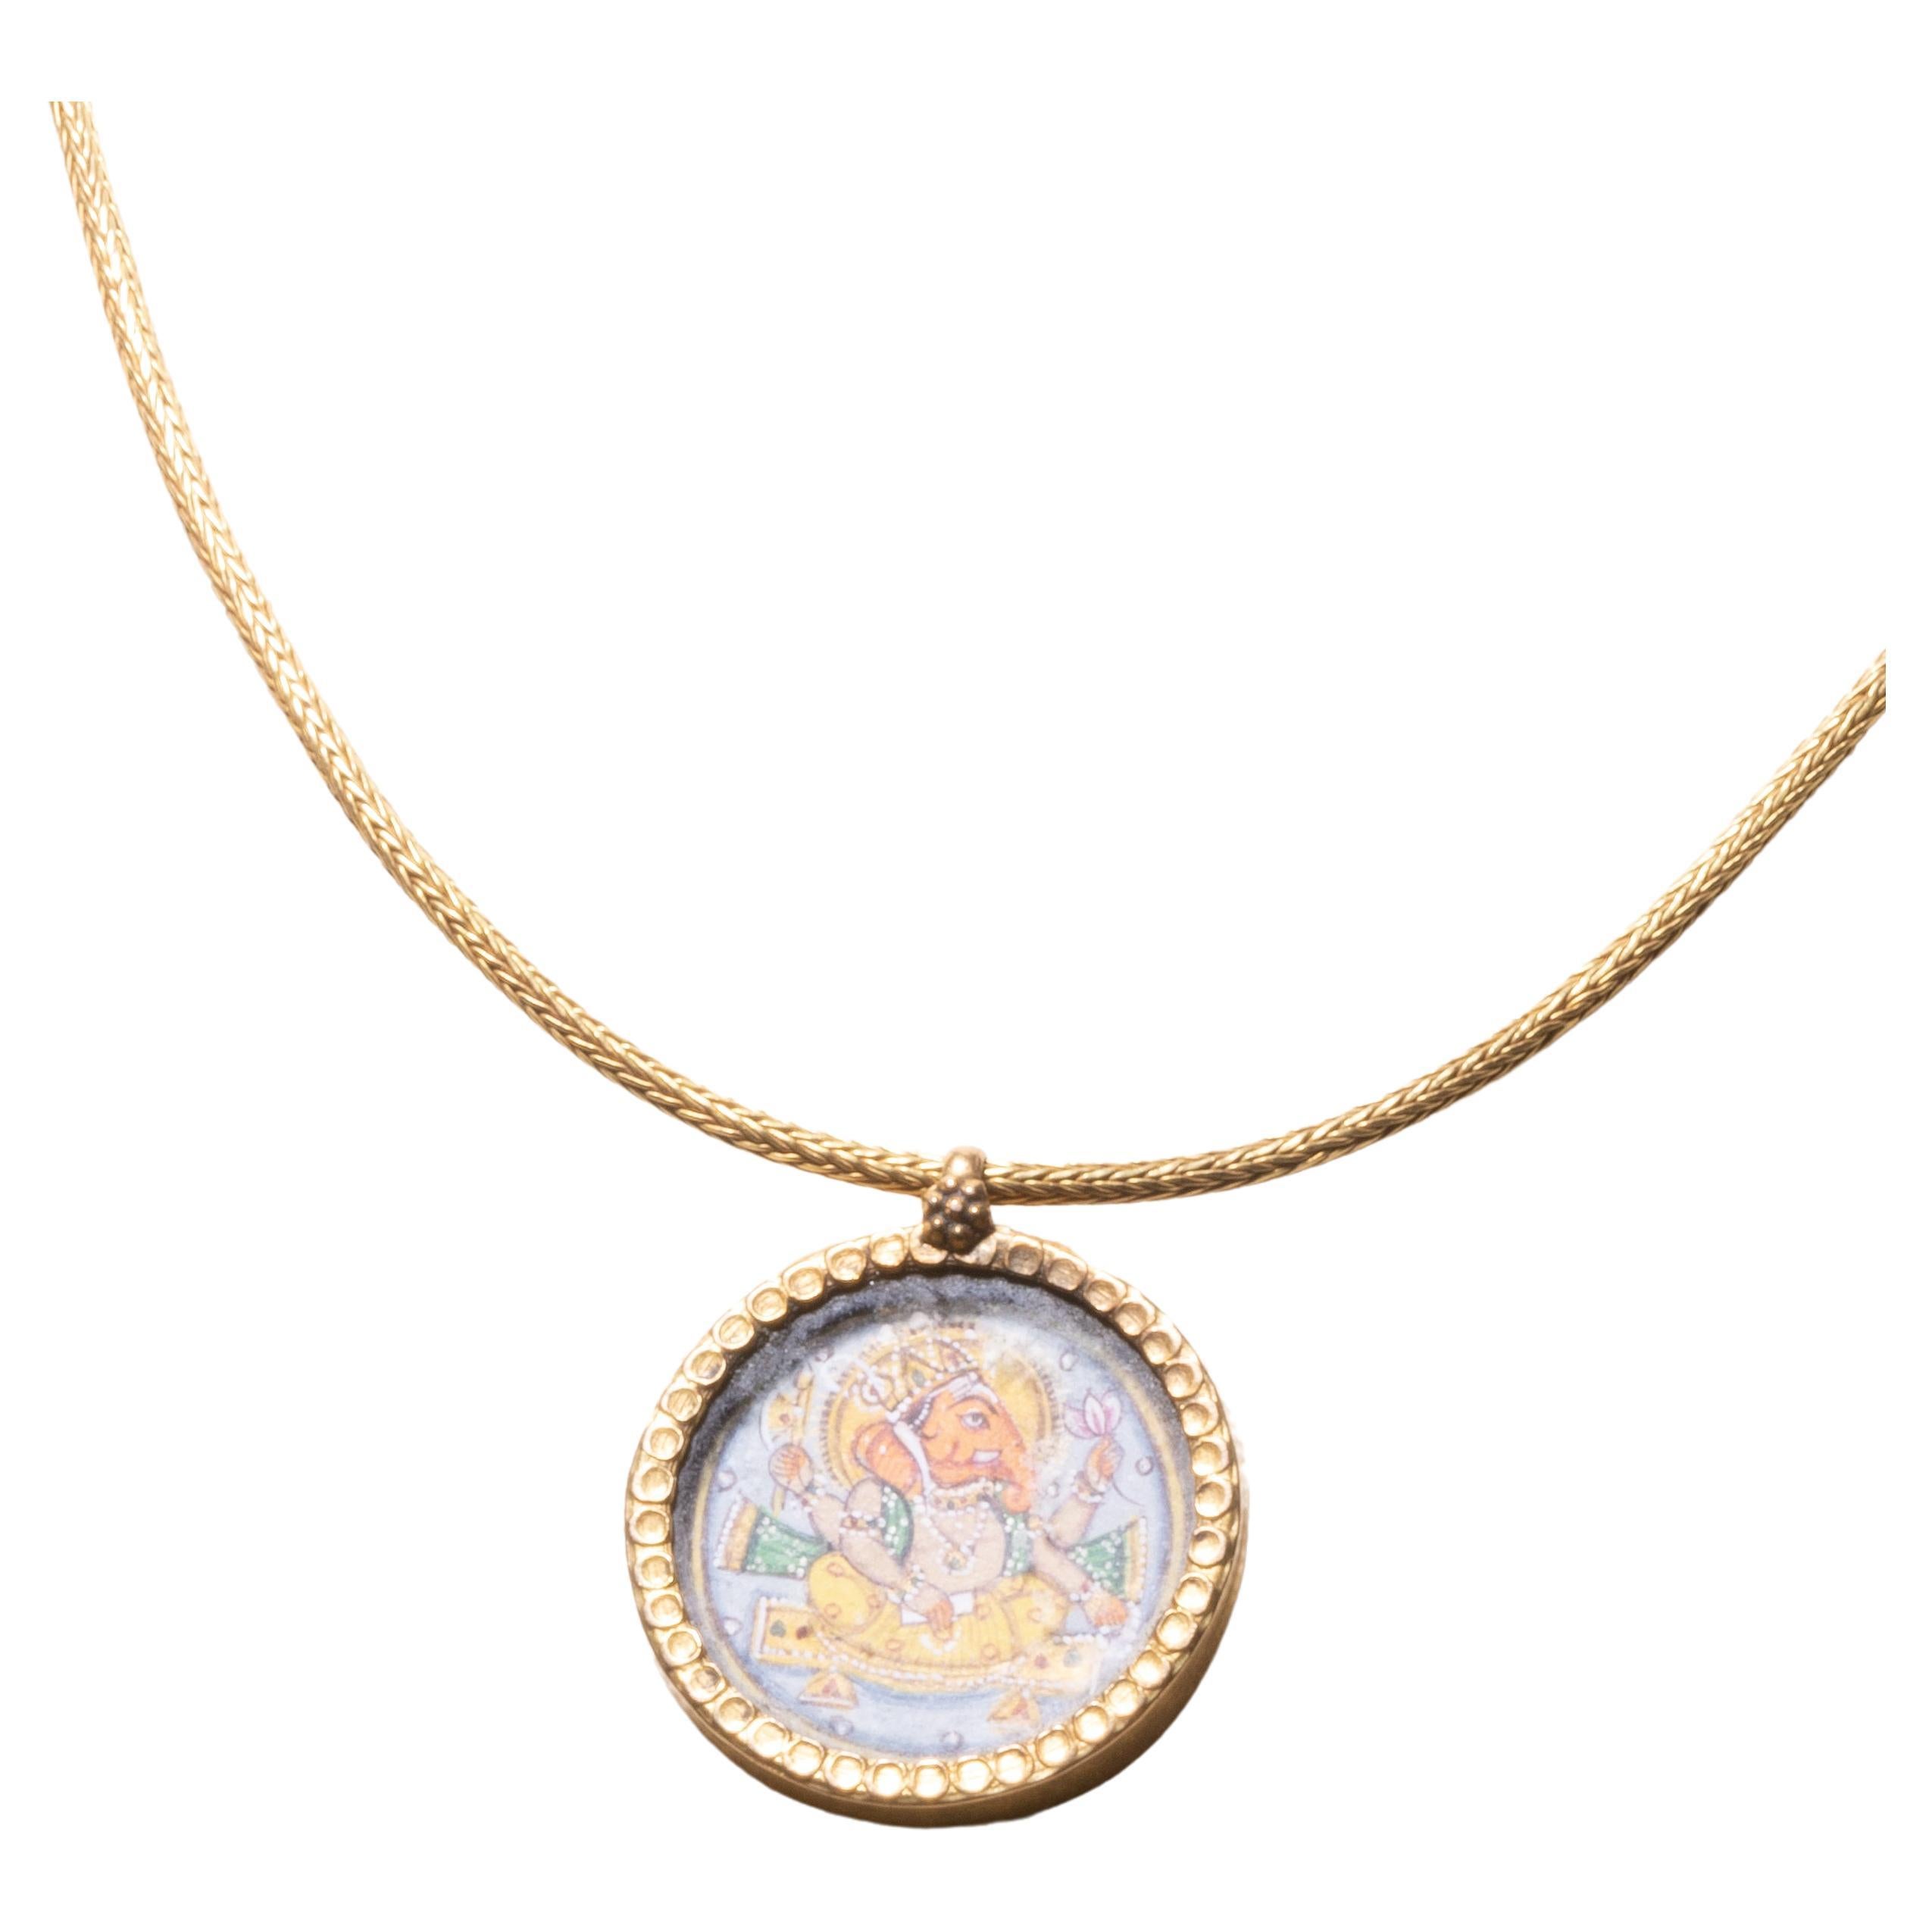 A charming and auspicious pendant necklace featuring a finely detailed, hand-painted Ganesh (the Hindu deity known as is the remover of obstacles).  It is encased in 22K gold with a gold backing and tooled workmanship around the border.  The chain